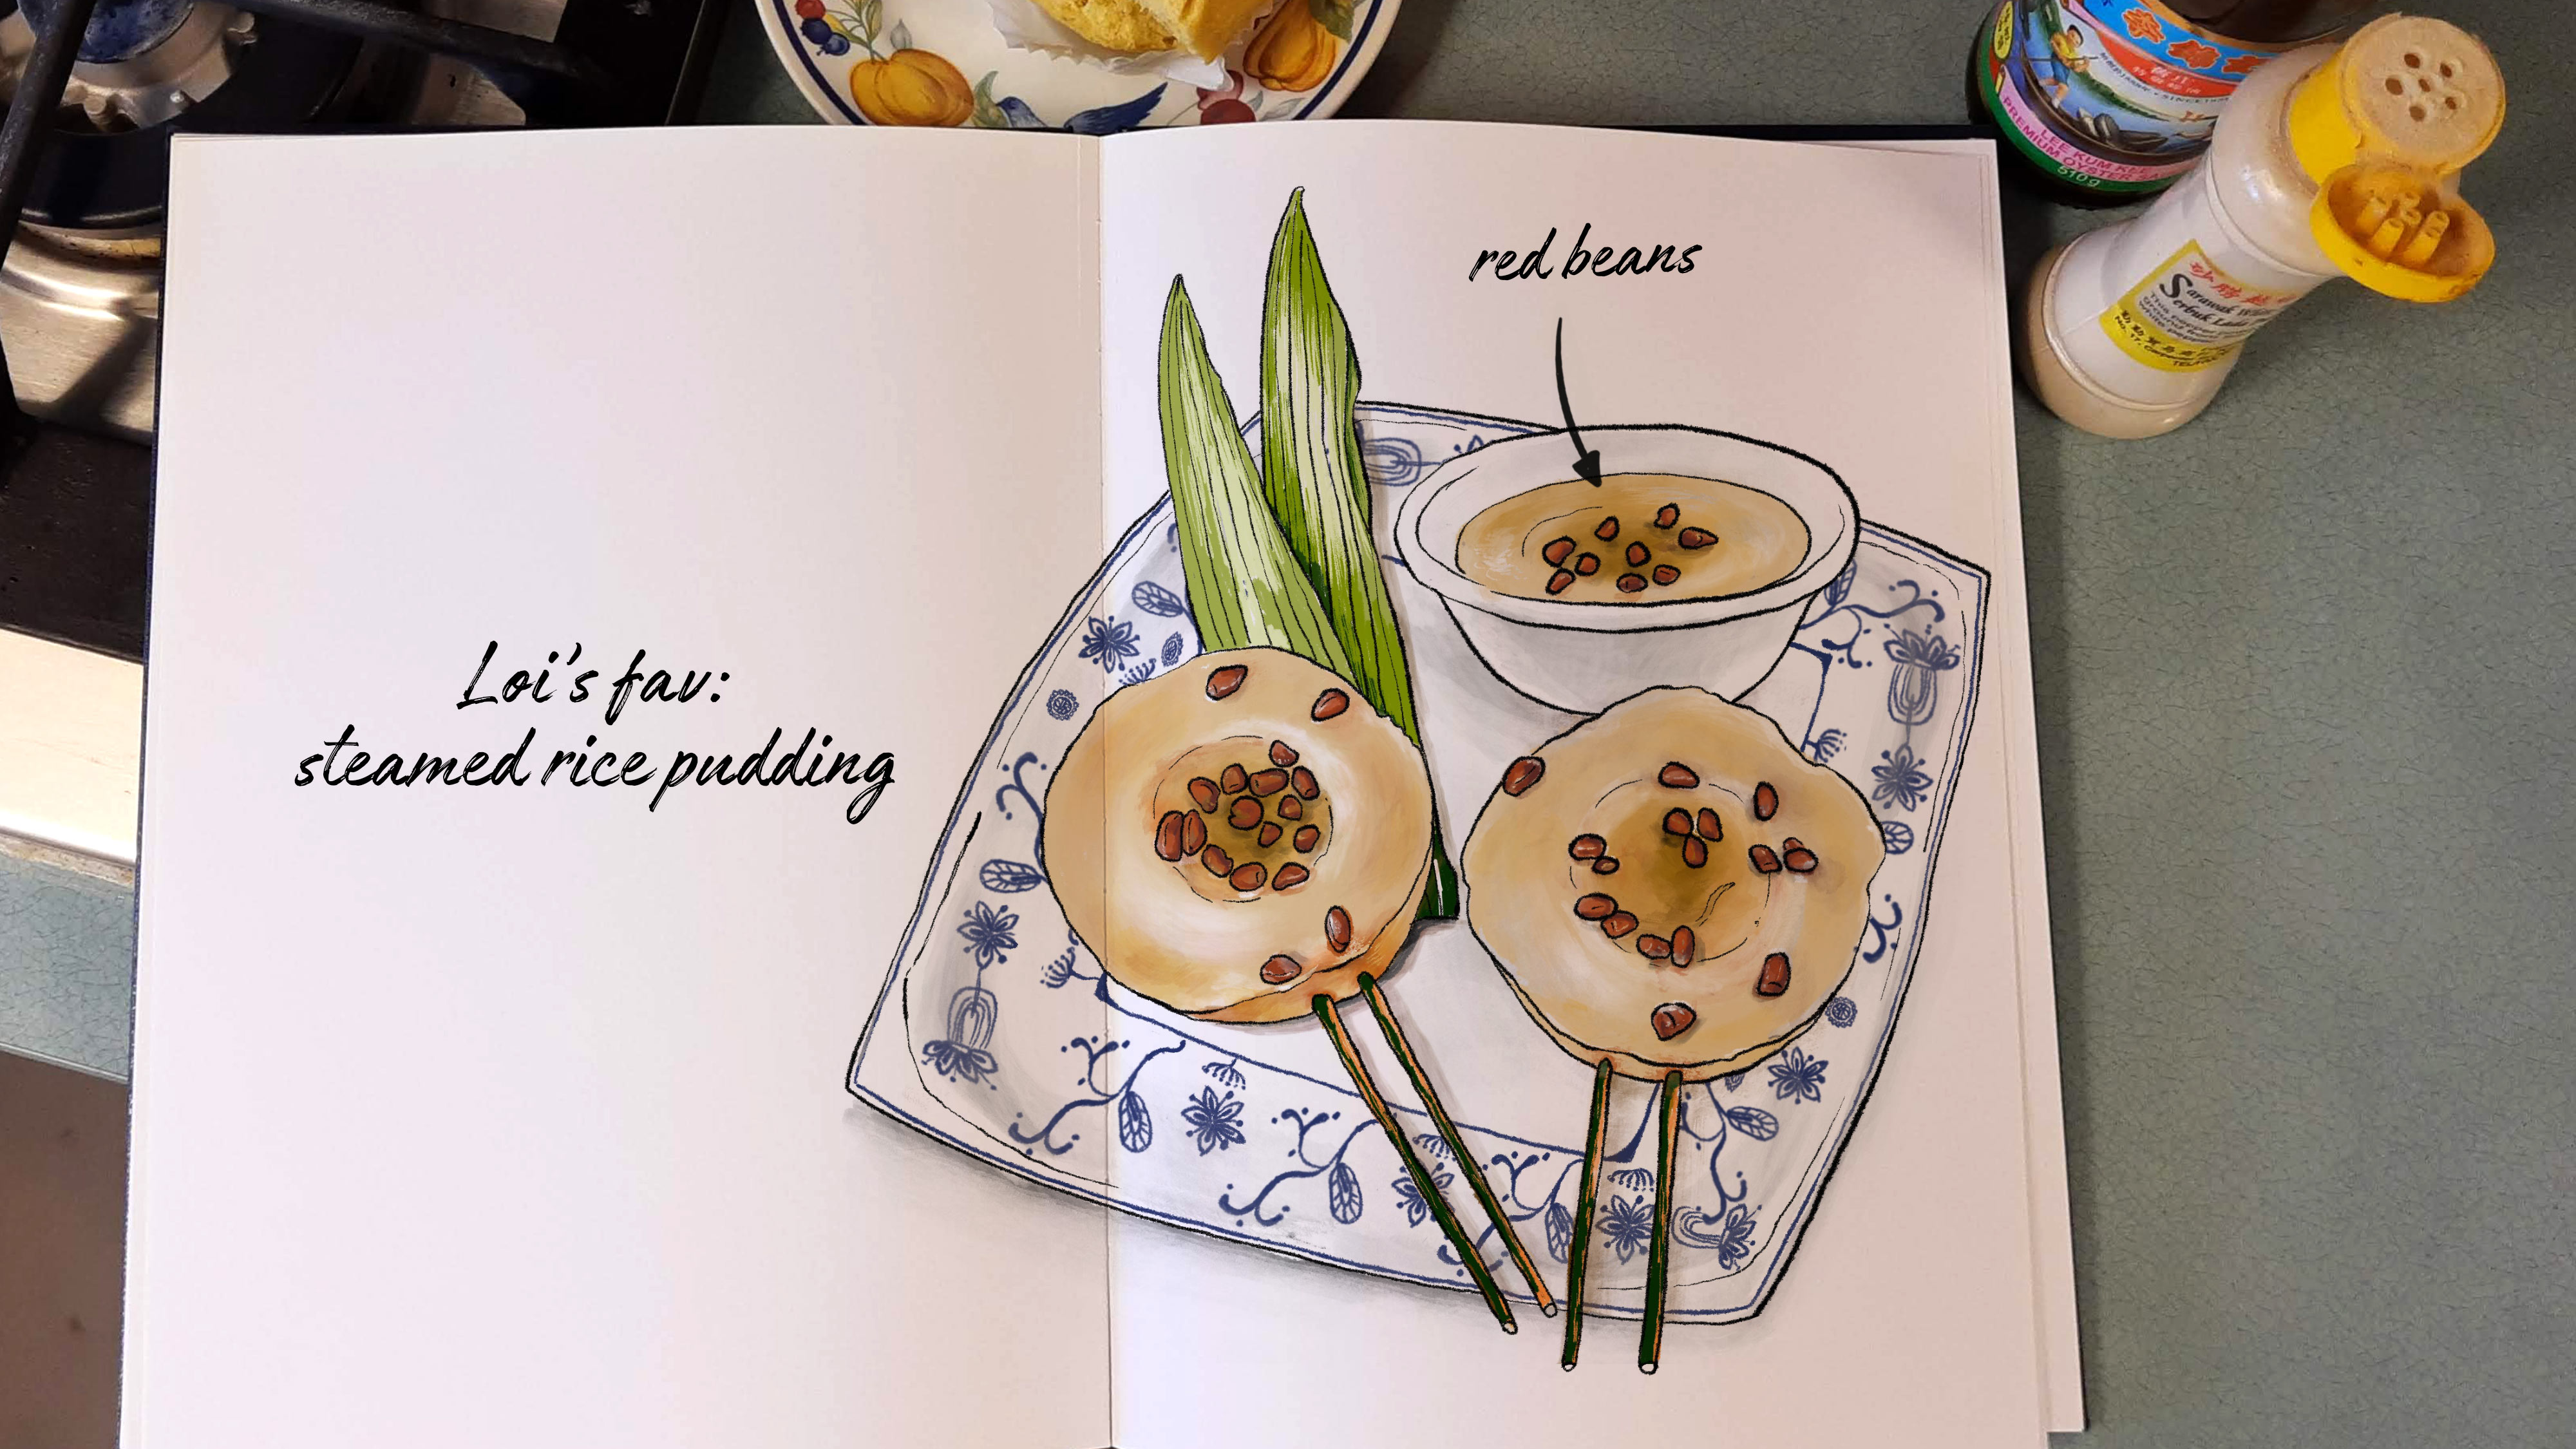 Steamed red bean pudding